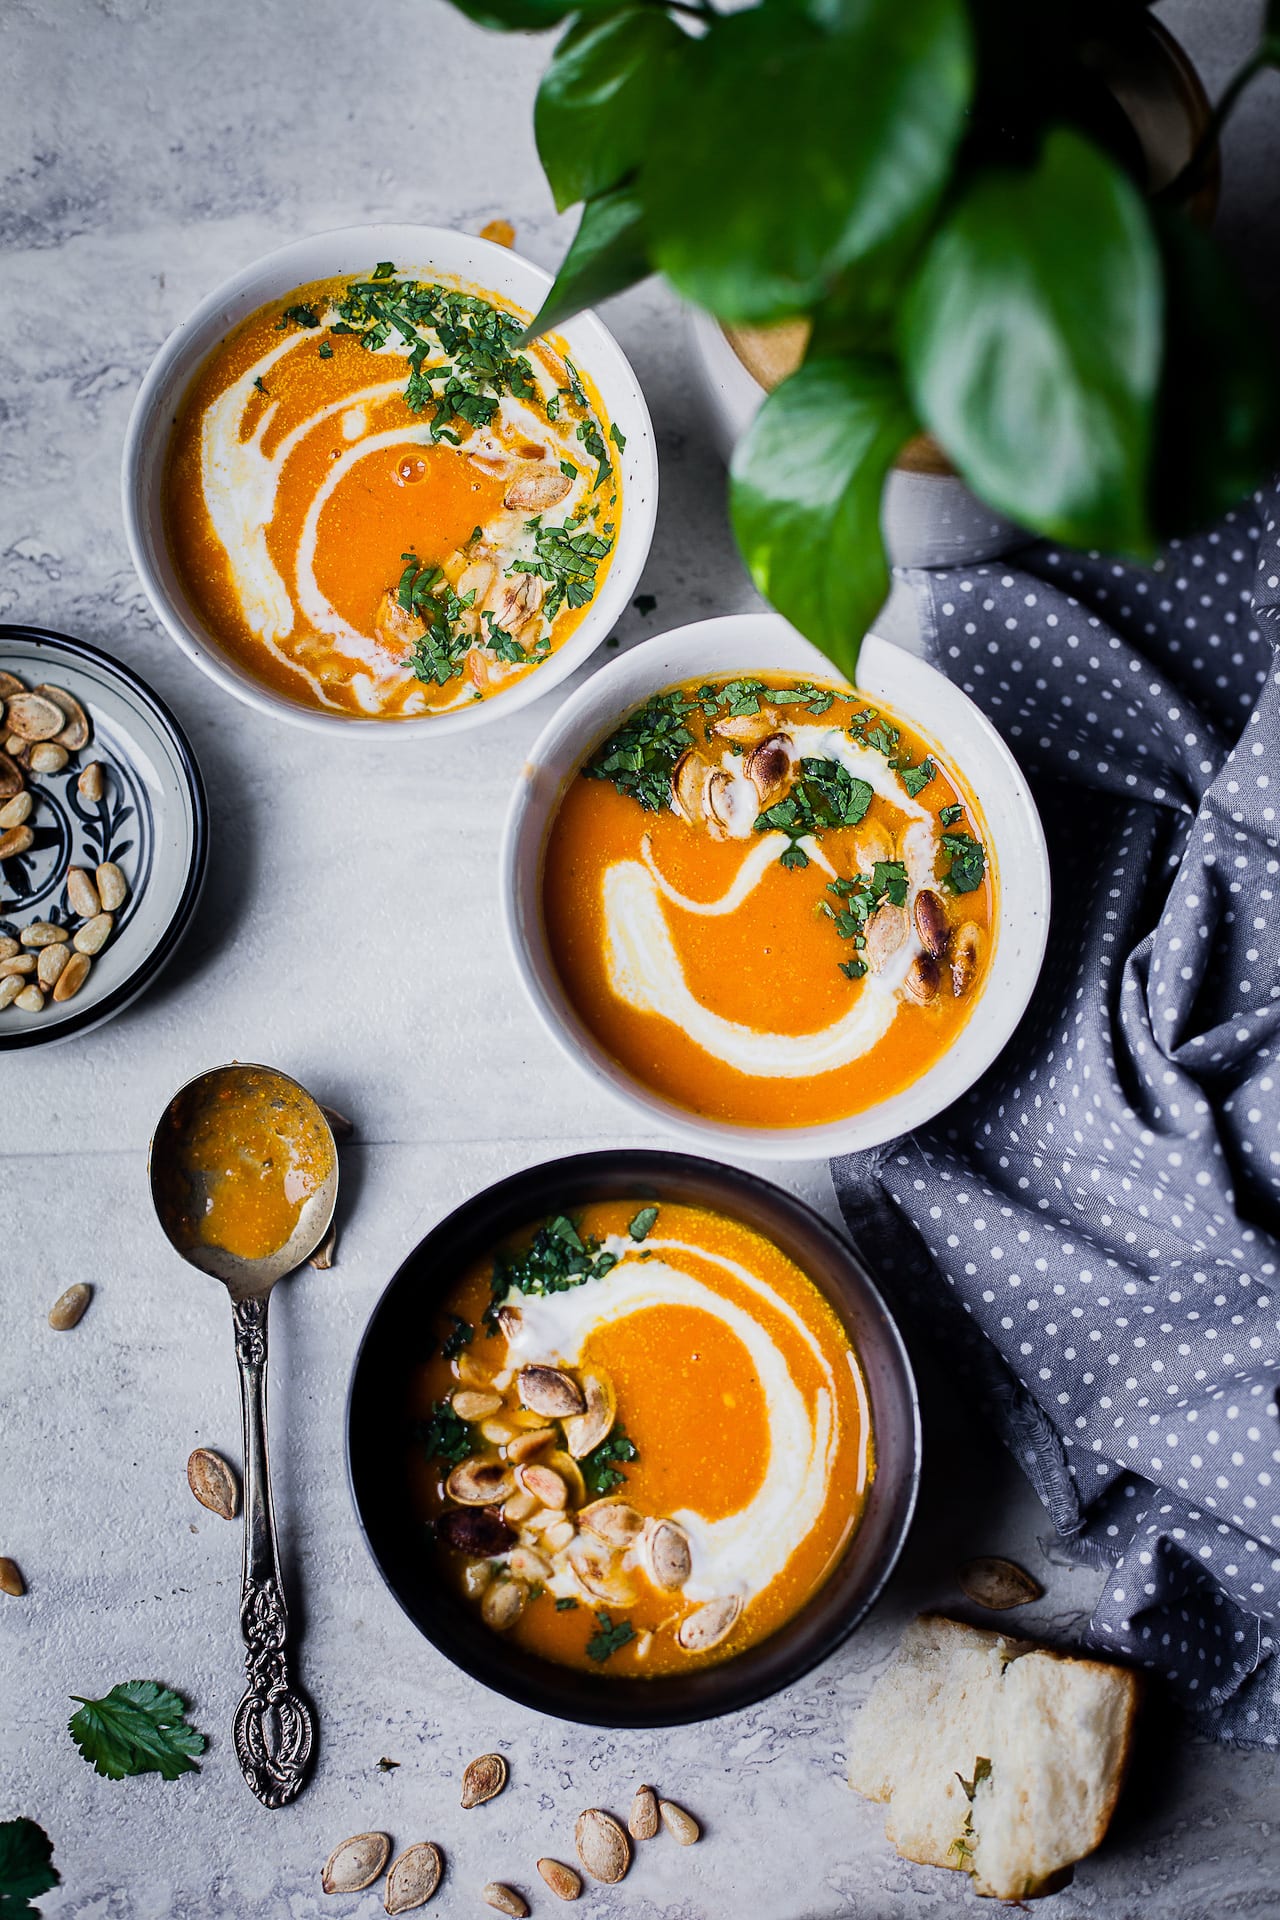 Soothing Winter Soup| Playful Cooking #soup #carrot #ginger #5ingredients #winterfood